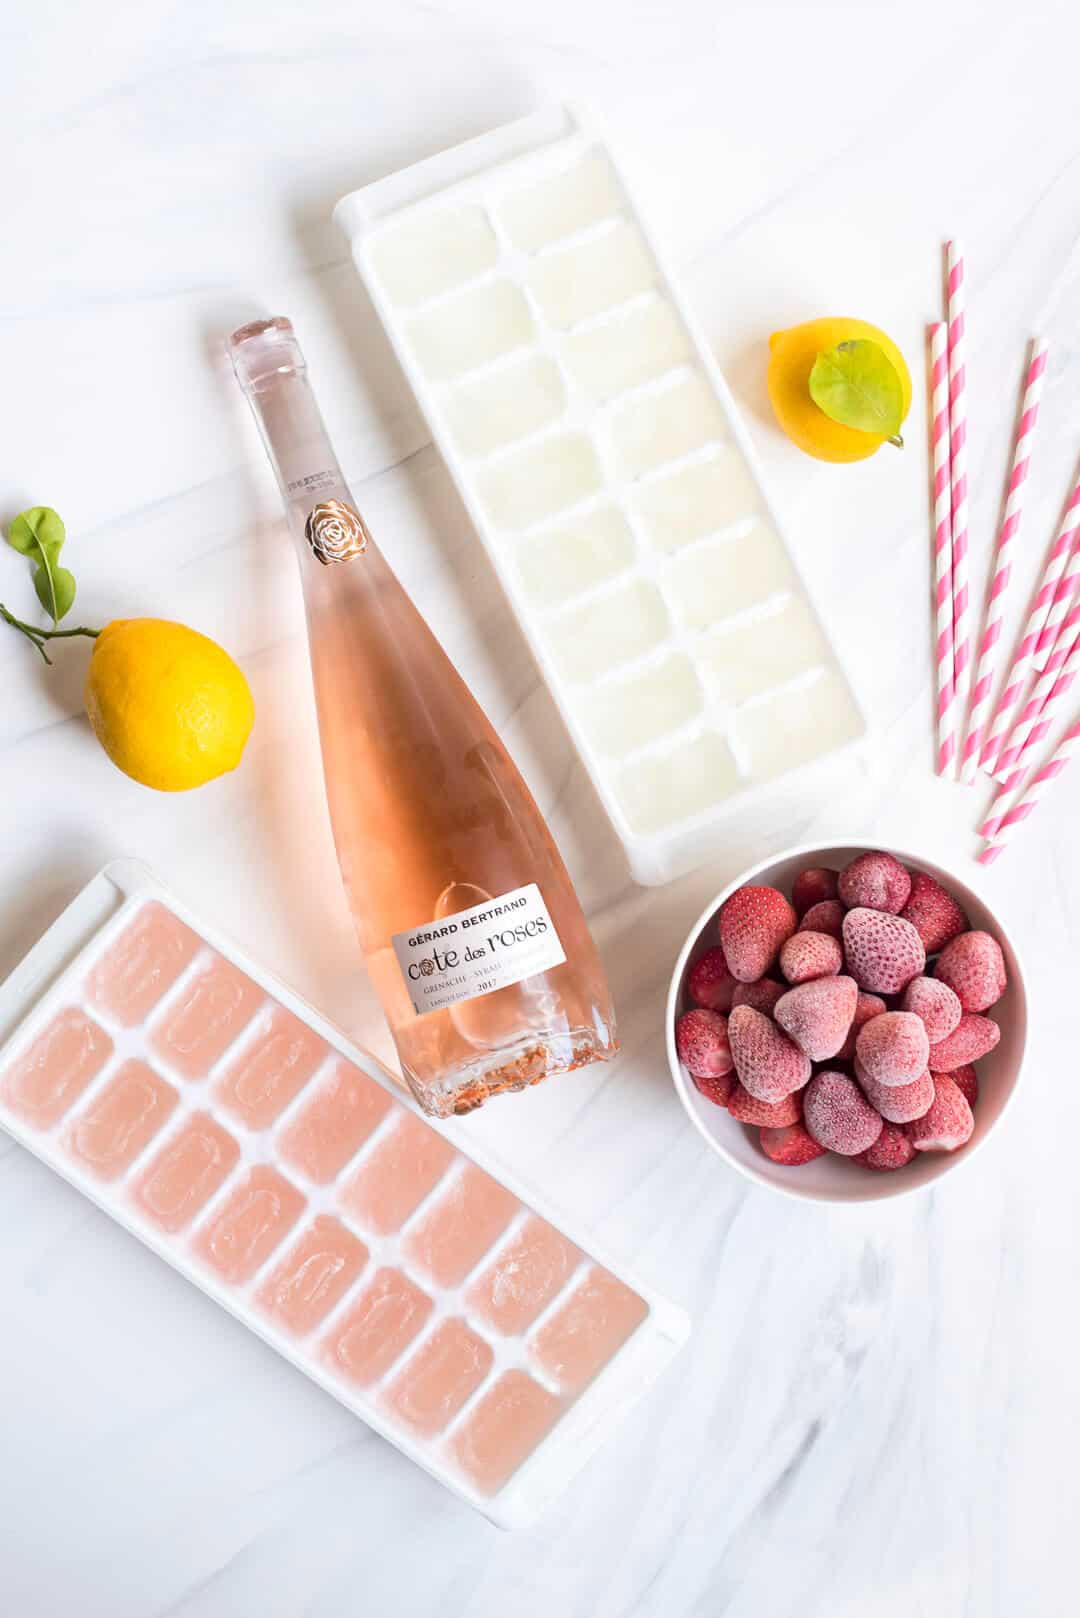 Strawberry Lemonade Frosé - Ingredients including a bottle of rose, ice cube trays with frozen rose and lemonade, frozen raspberries, fresh lemons and pink and white striped straws.